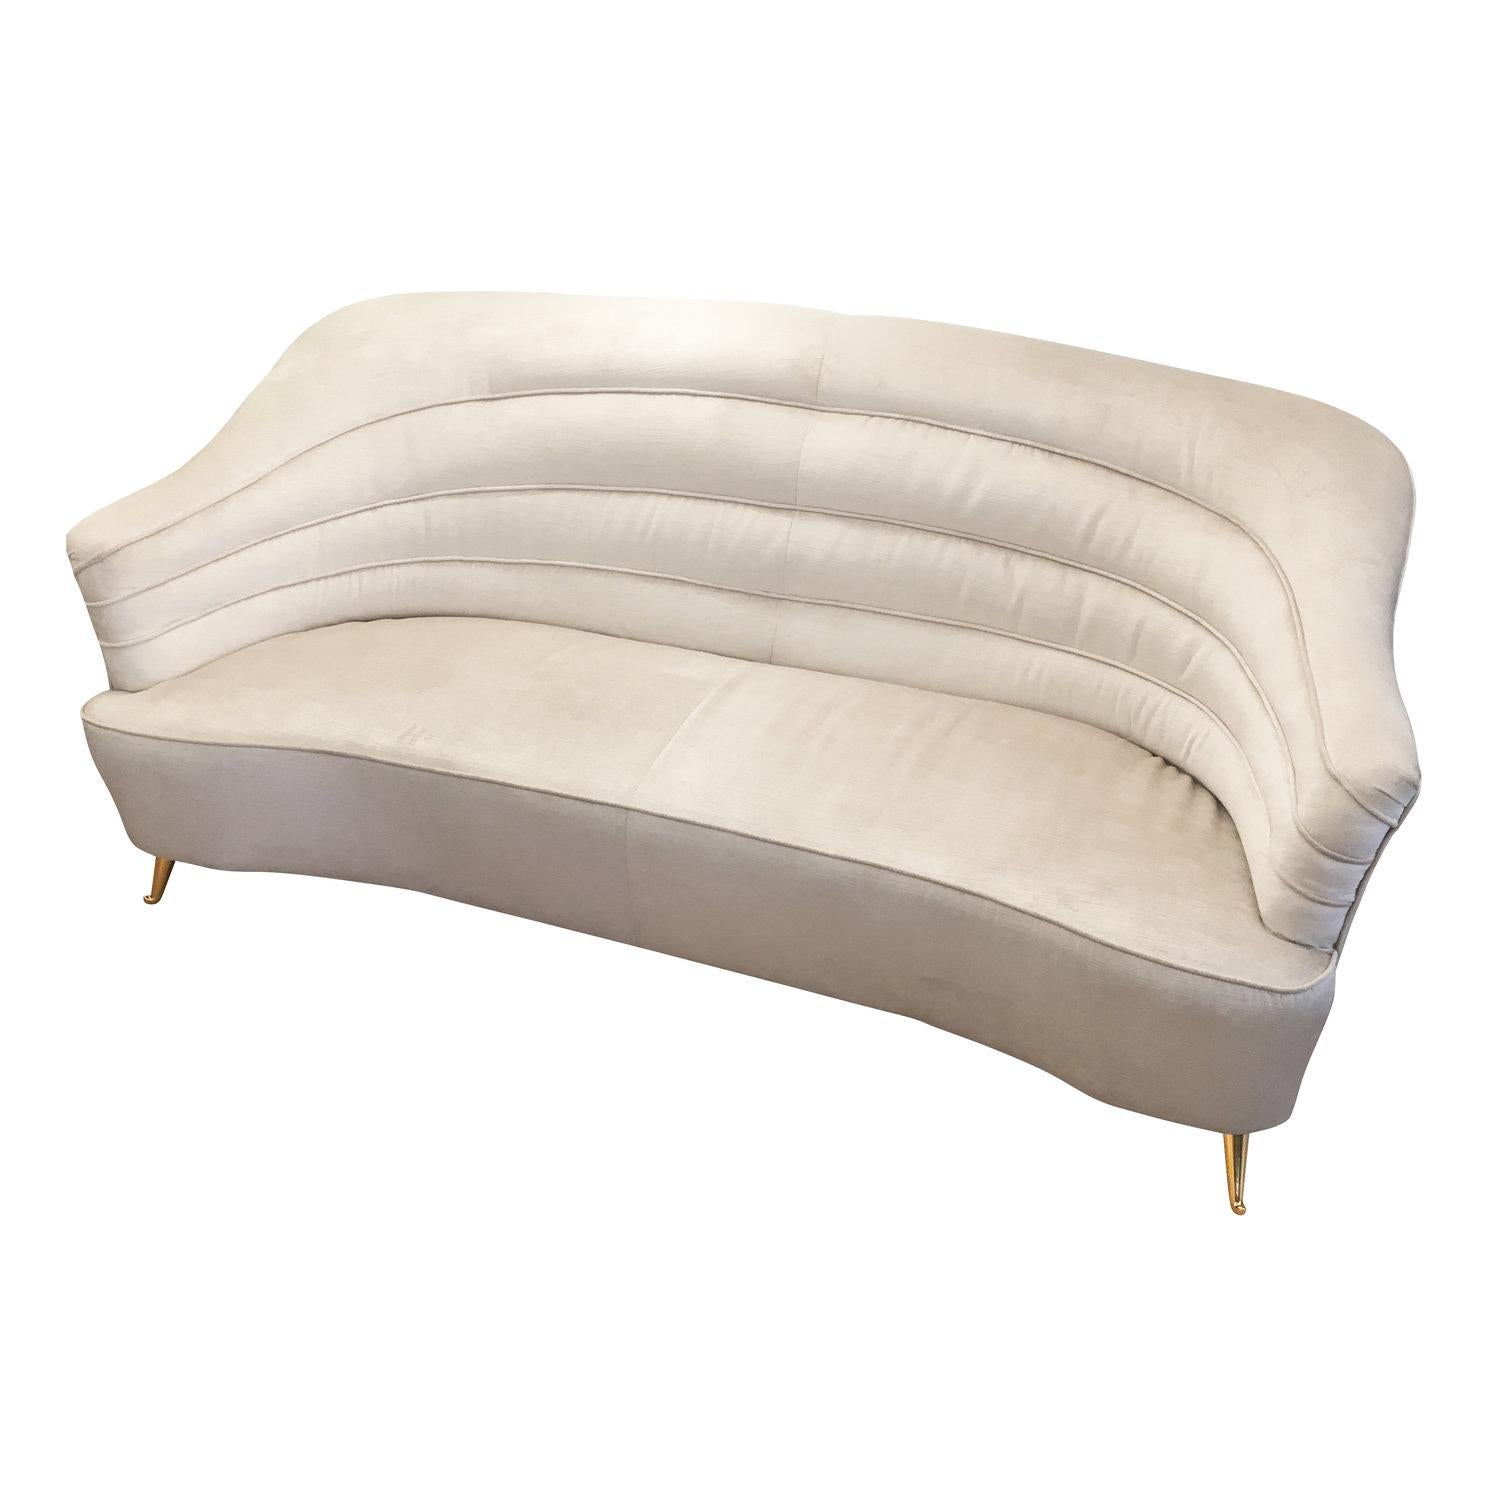 Elegant sofa designed by famous Roman Architect Busiri Vici. Has been re-upholstered in a pearl velvet. The feet are brass.

Conditions: Some wear to the fabric. Feet have been replaced. 
